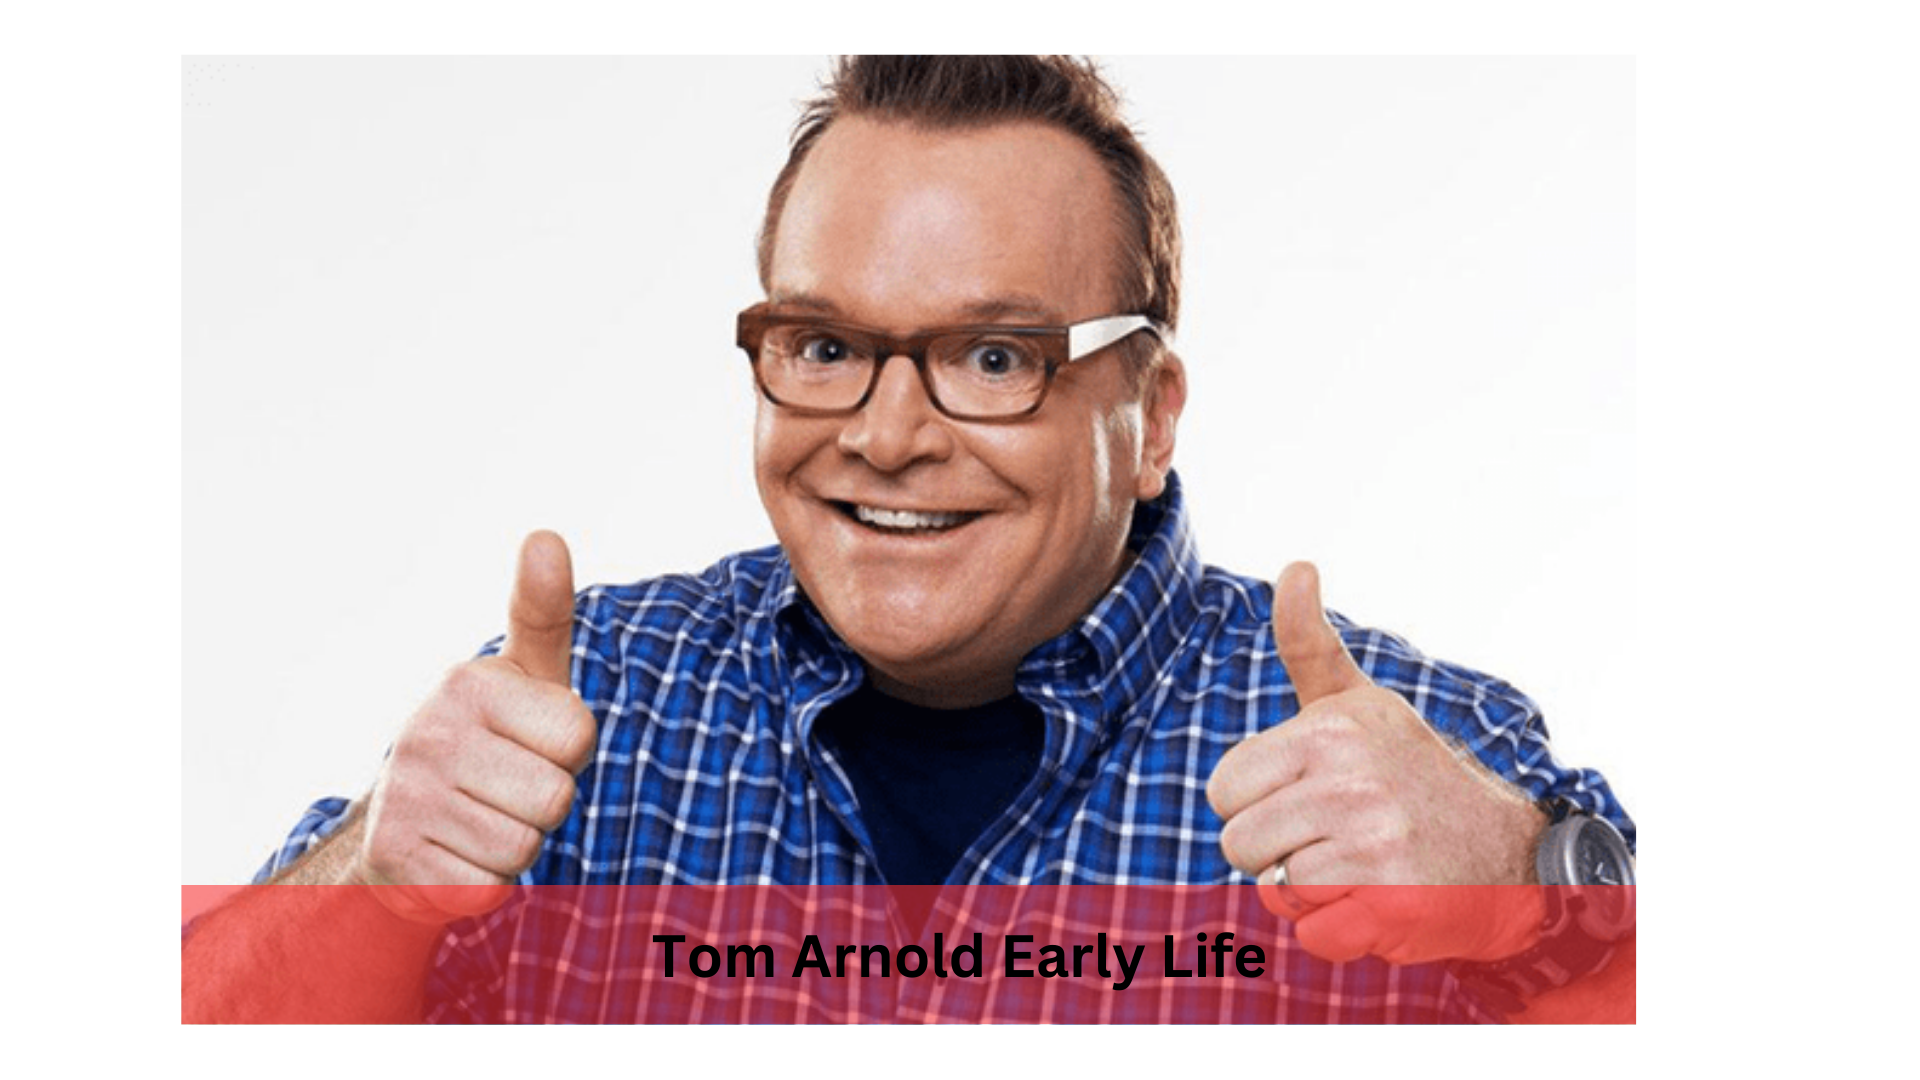 Tom Arnold Early Life